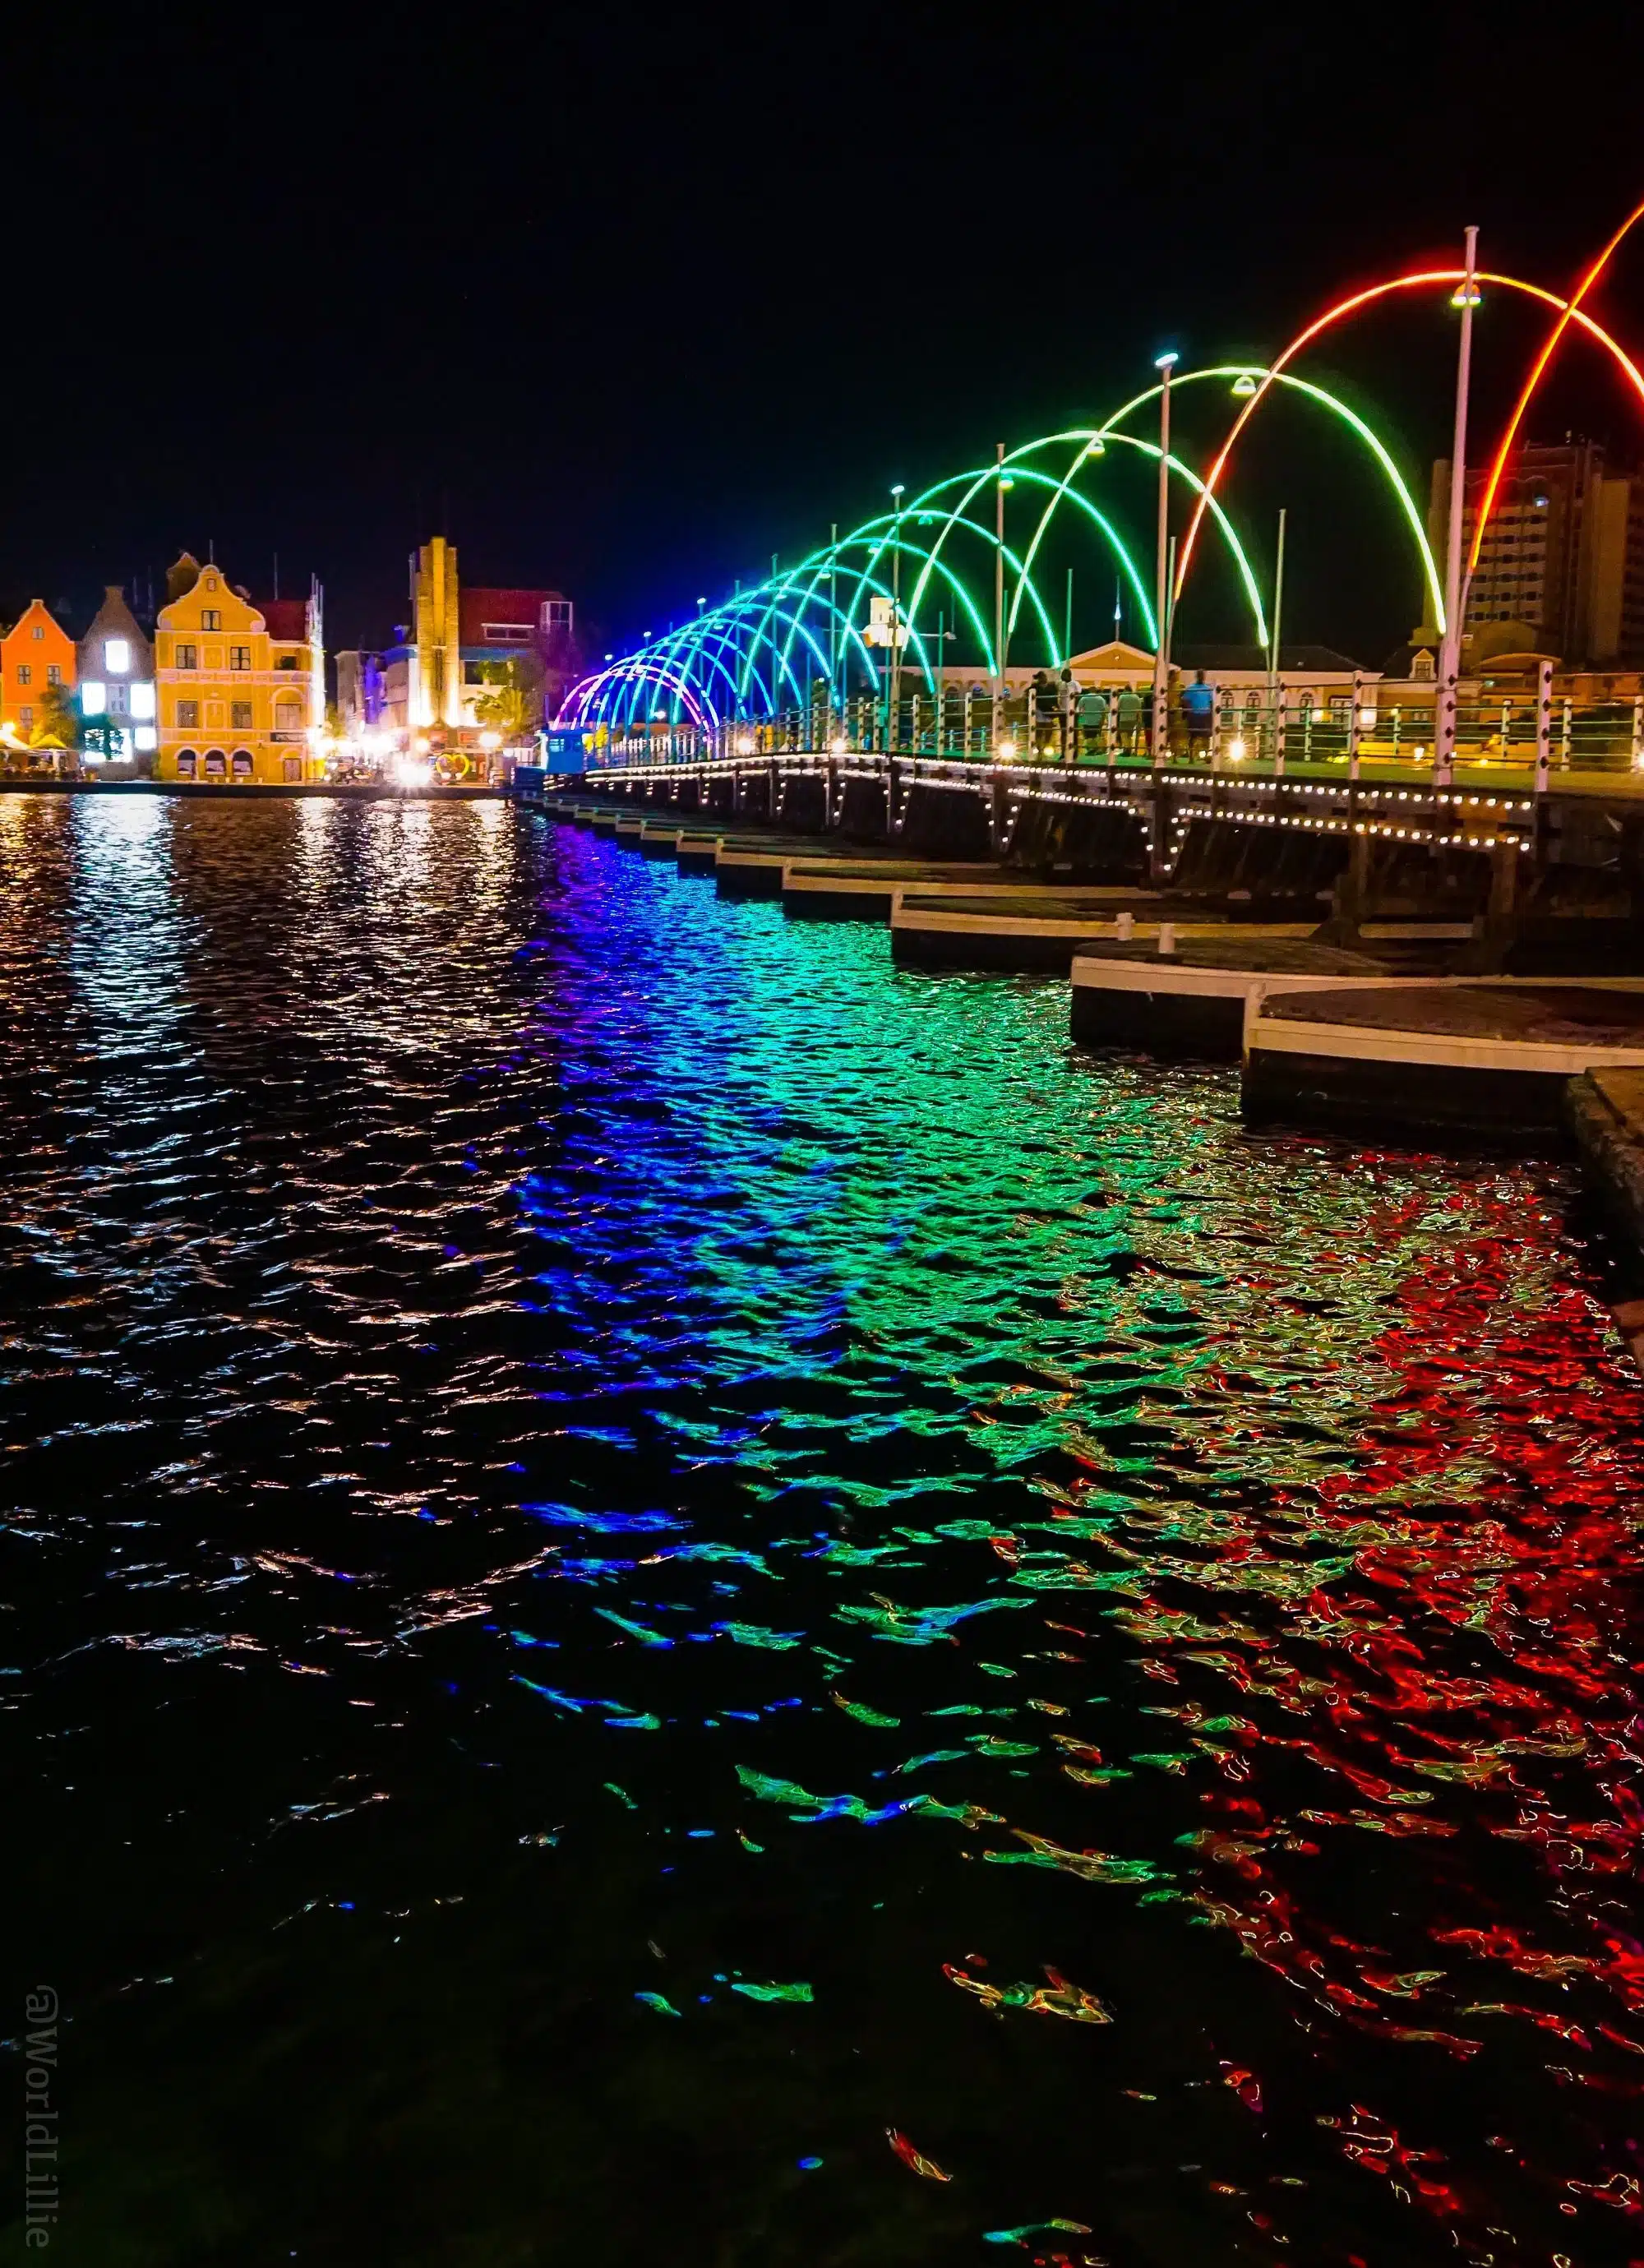 The Queen Emma Floating Bridge in Willemstad, Curacao, is a gorgeous floating rainbow!